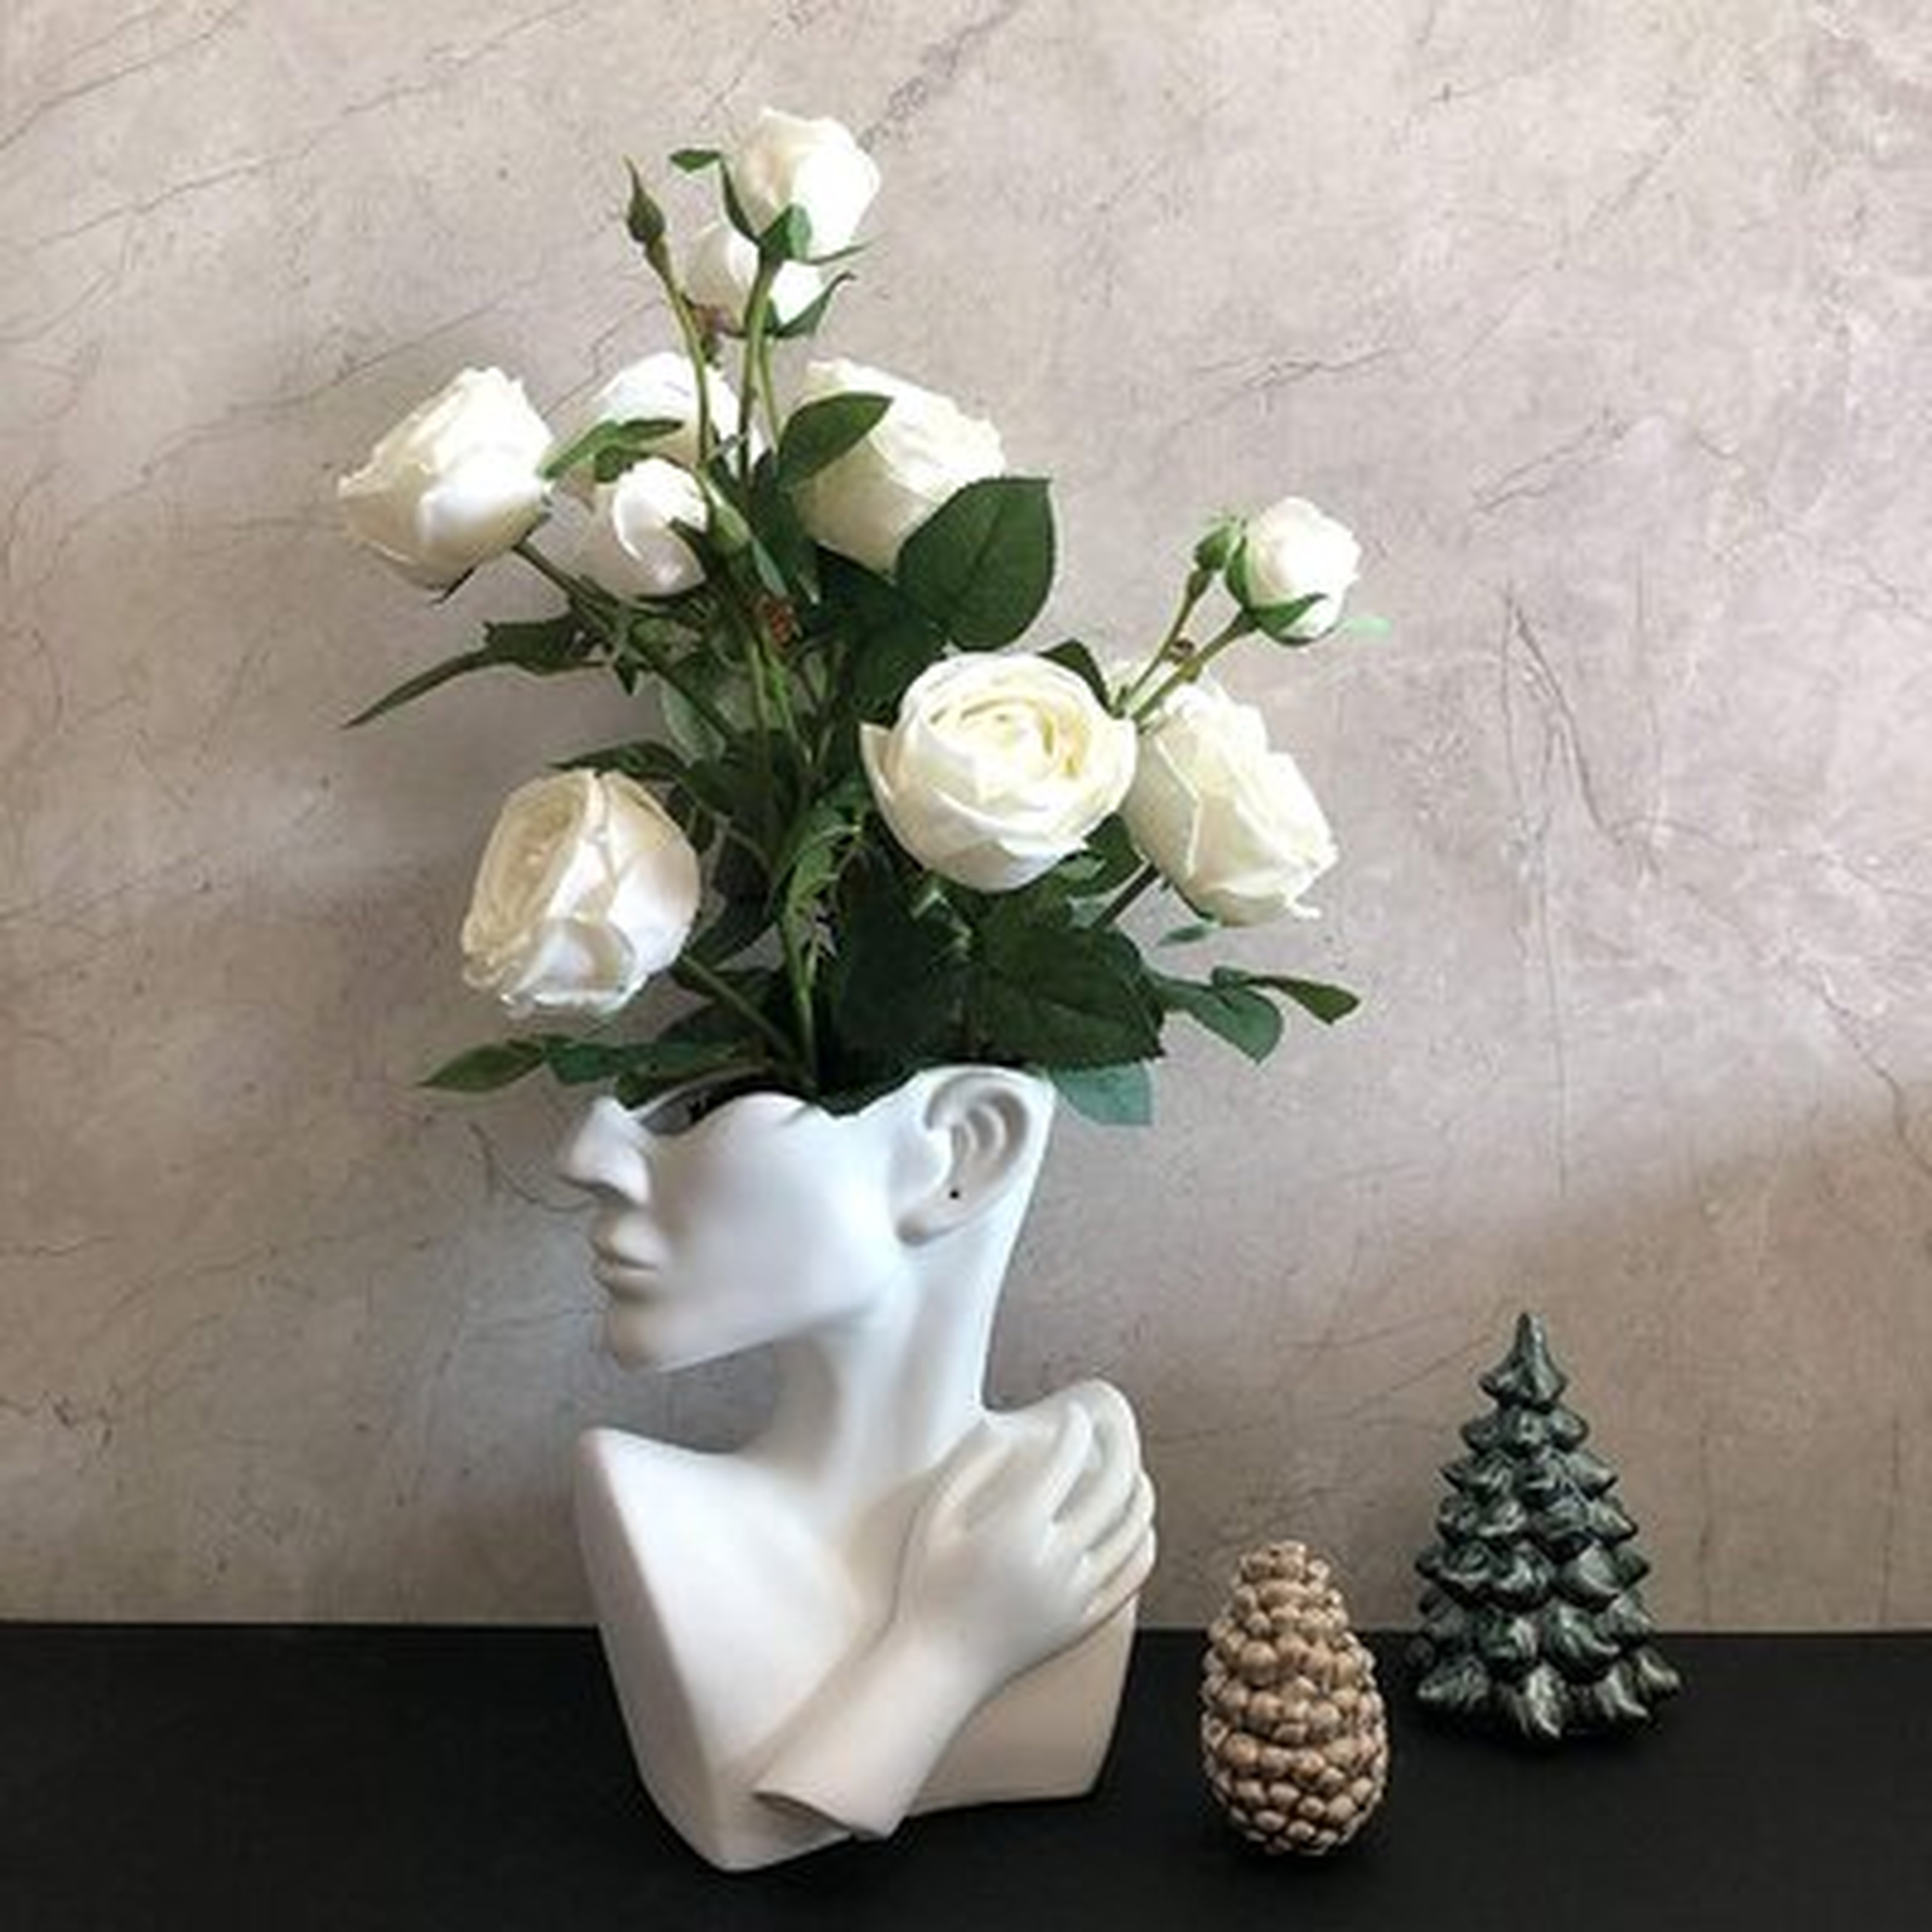 Modern White Ceramic Vase For Home Décor Abstract Face Planter Statue Ornament Floral Arrangement Container Flower Vessel For Kitchen Dining Coffee Table Home Wedding Centerpiece Decoration - Wayfair